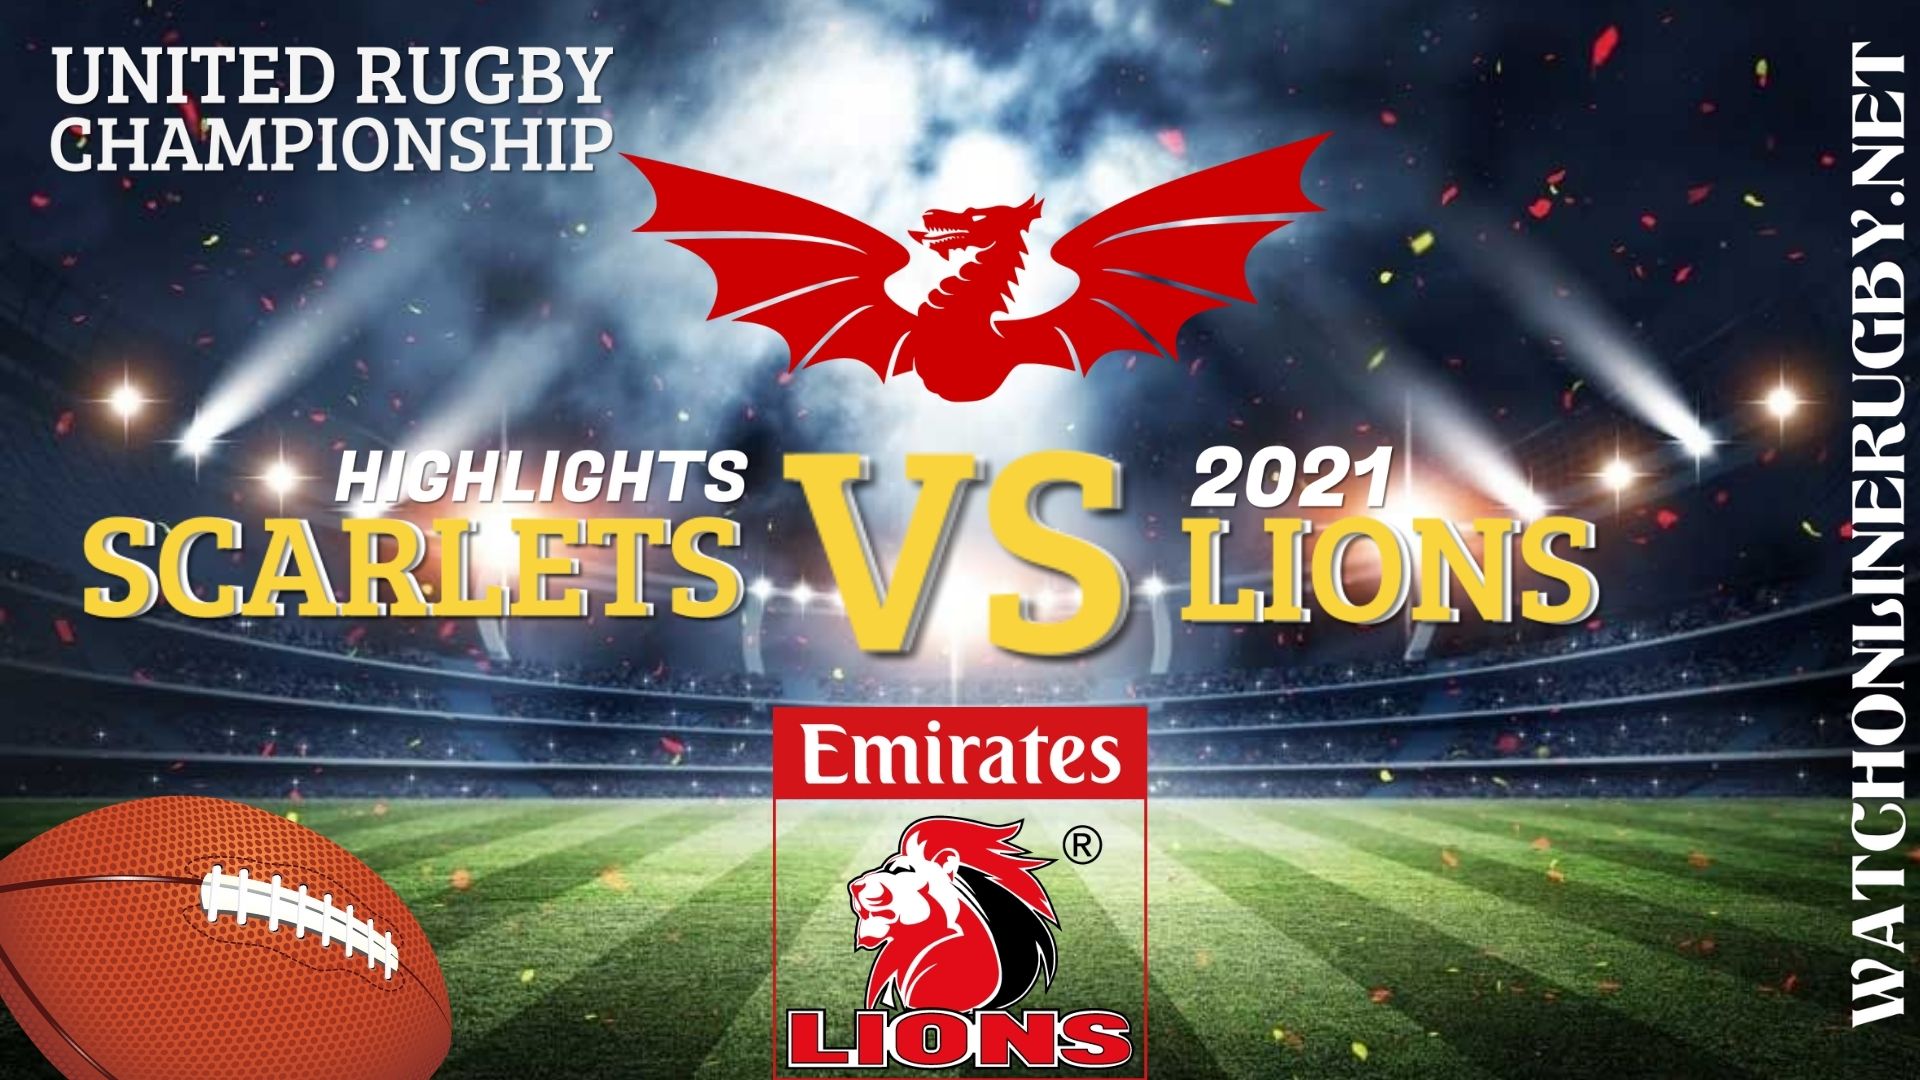 Scarlets Vs Lions United Rugby Championship 2021 RD 2